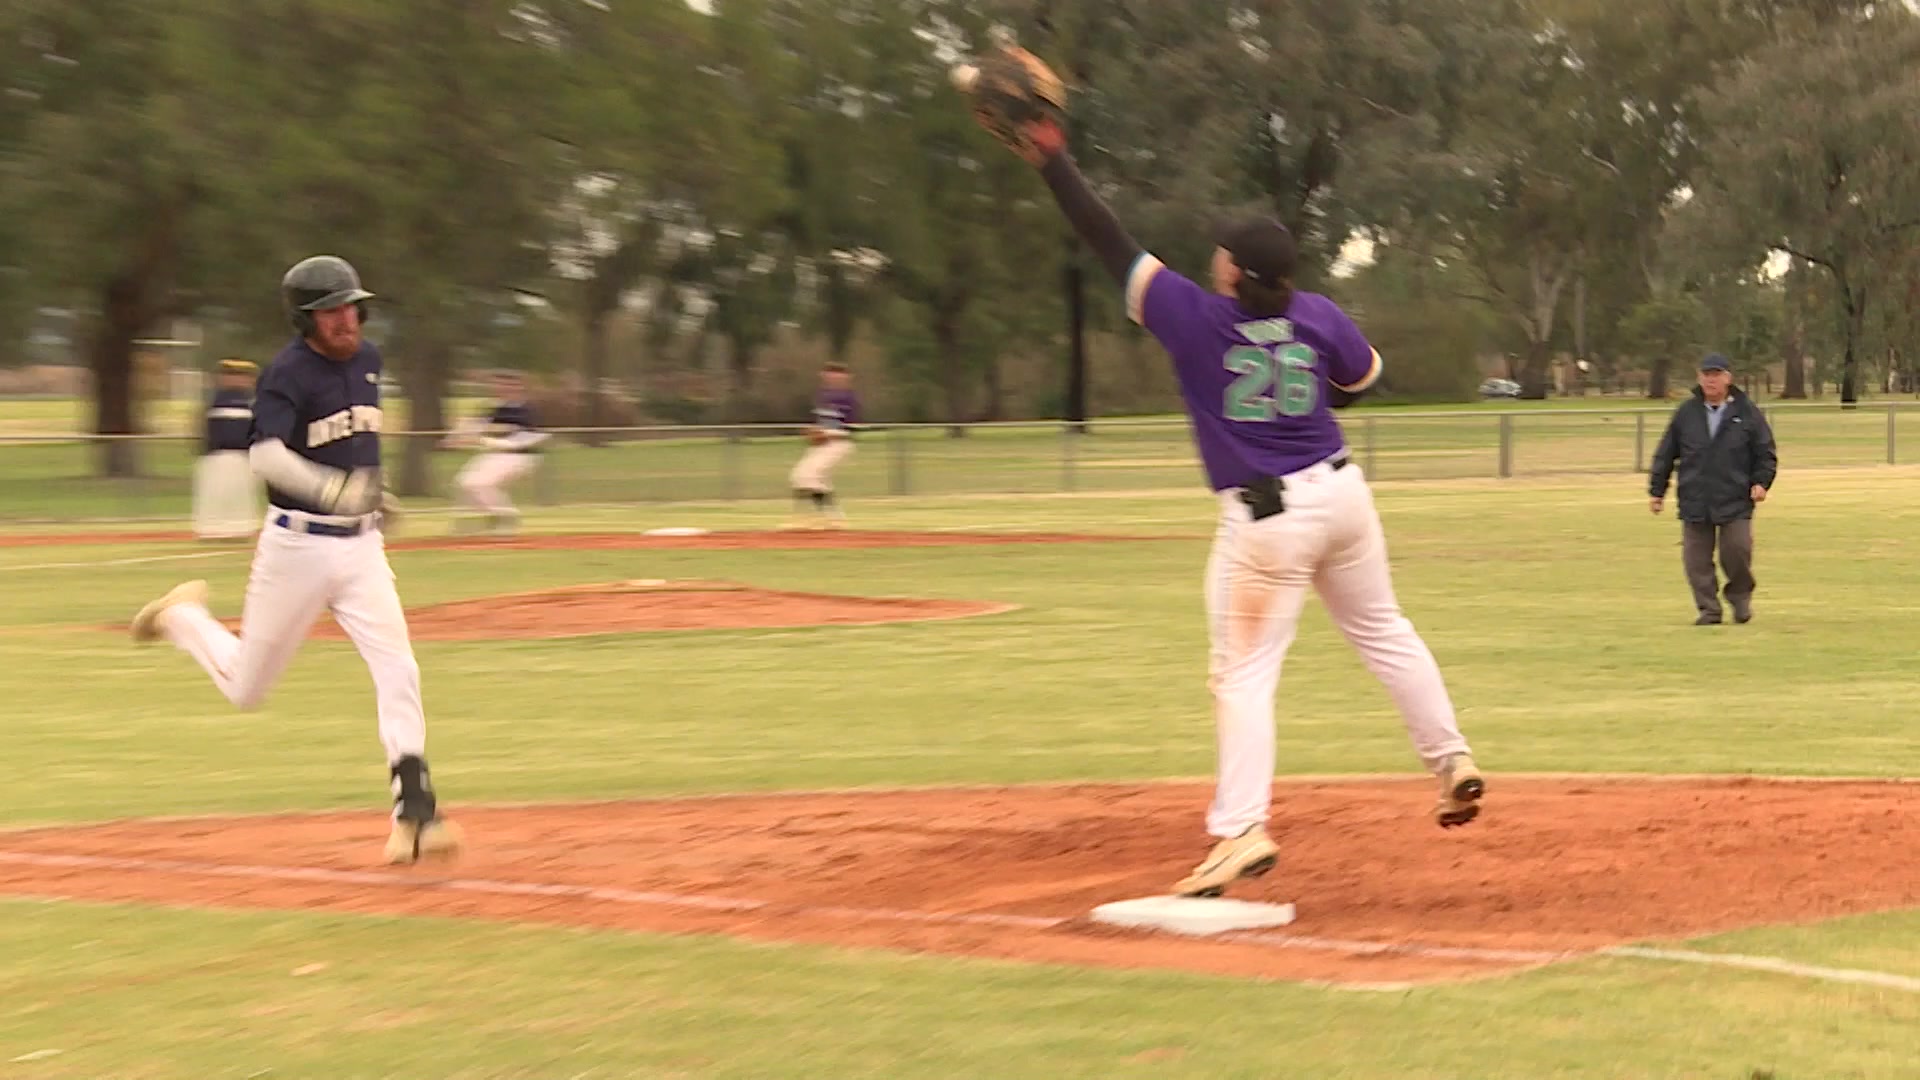 700 BASEBALLERS FLOCK TO TAMWORTH FOR ANNUAL CARNIVAL